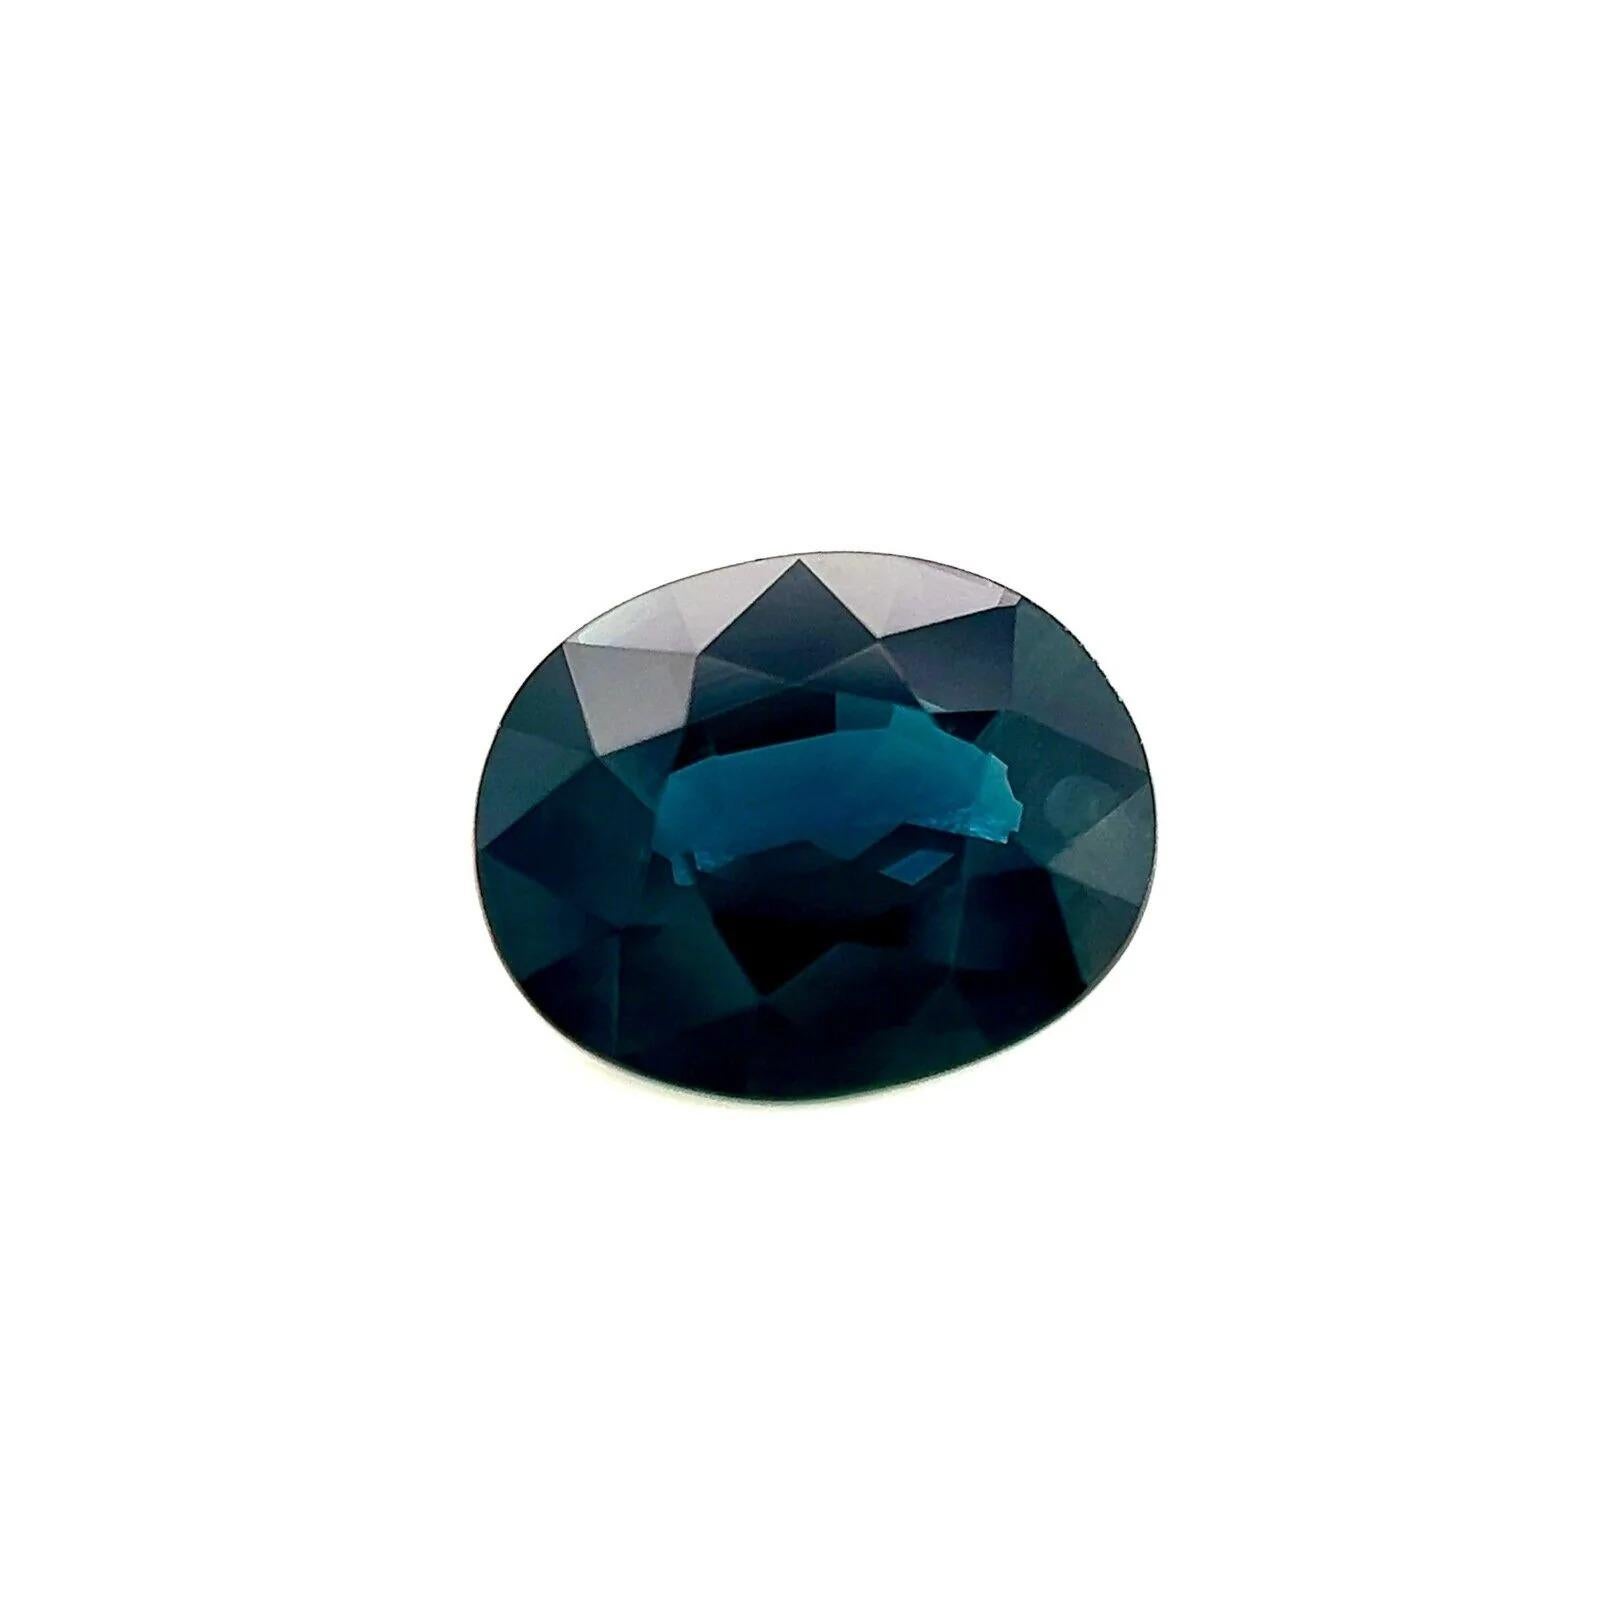 1.03ct Deep Blue Sapphire Oval Cut Rare 7x5.6mm Loose Gemstone VVS

Natural Deep Blue Sapphire Gemstone.
1.03 Carat sapphire with a beautiful deep blue colour. Also has excellent clarity, a very clean stone with only some small natural inclusions